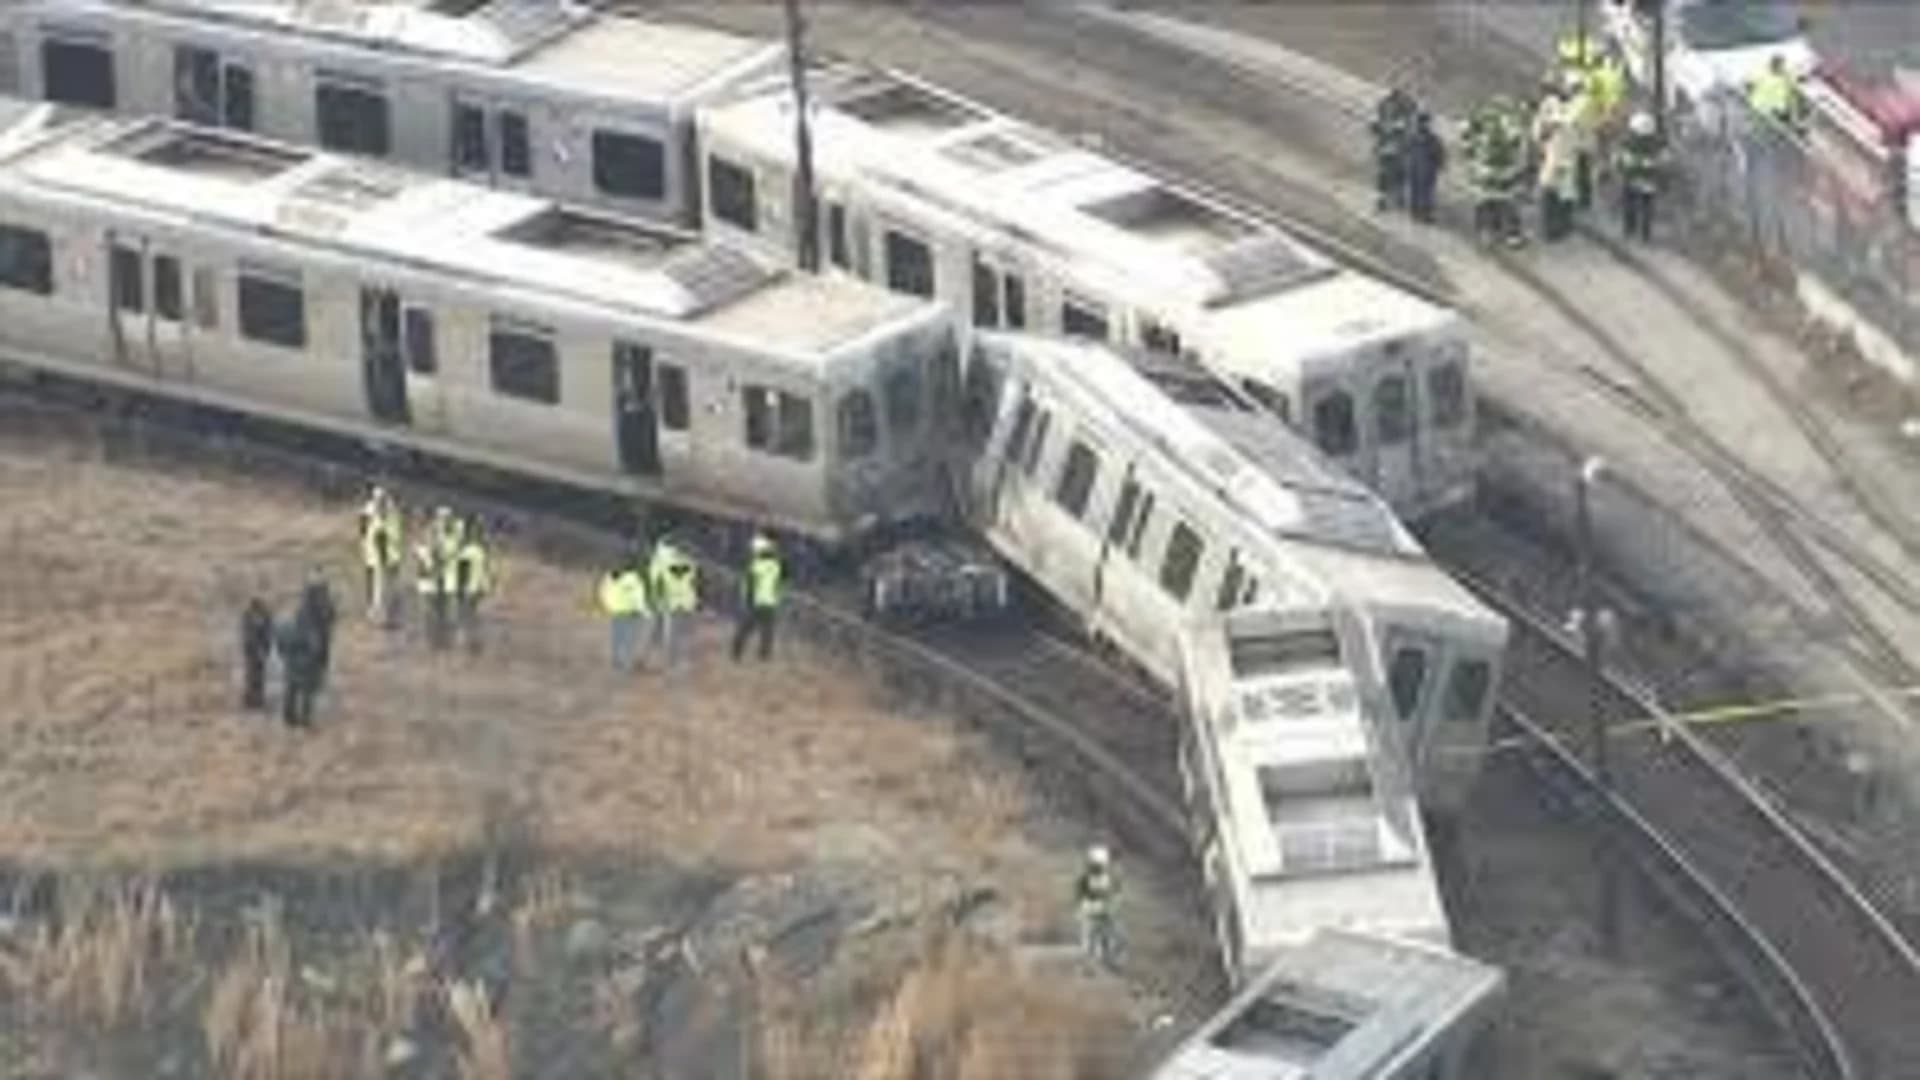 Commuter train crashes into parked train, injuring dozens